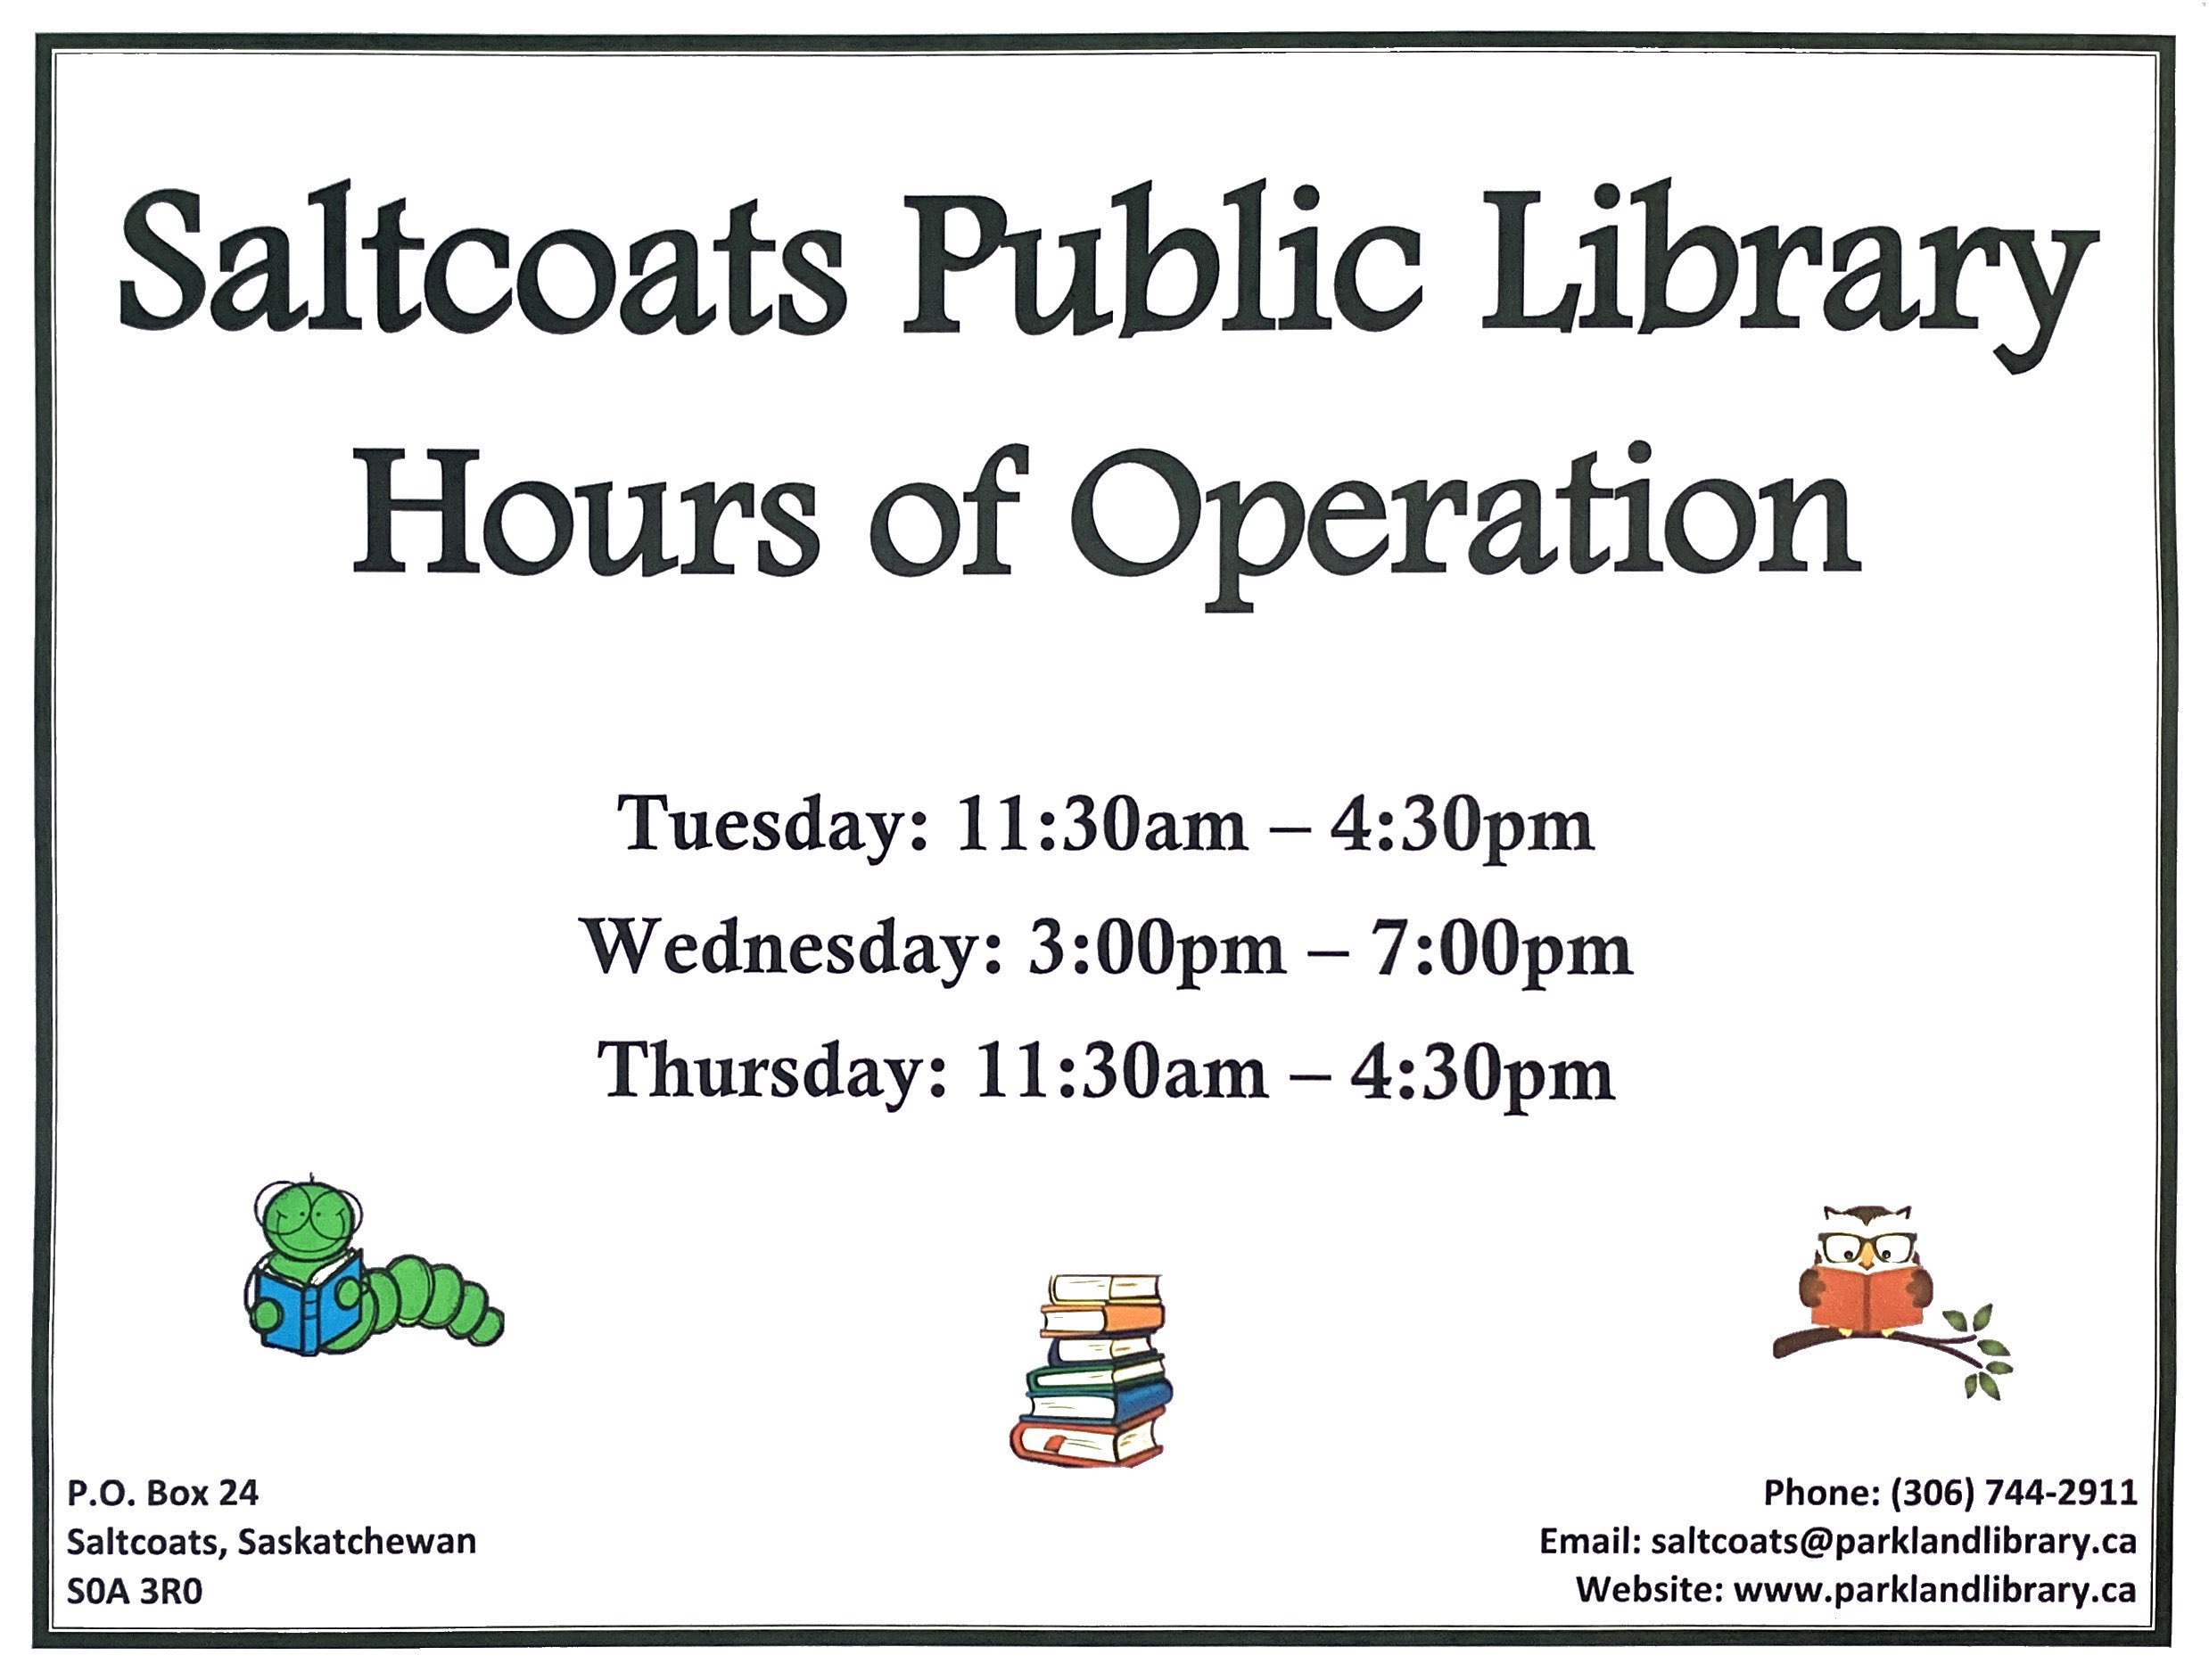 Saltcoats Public Library Hours